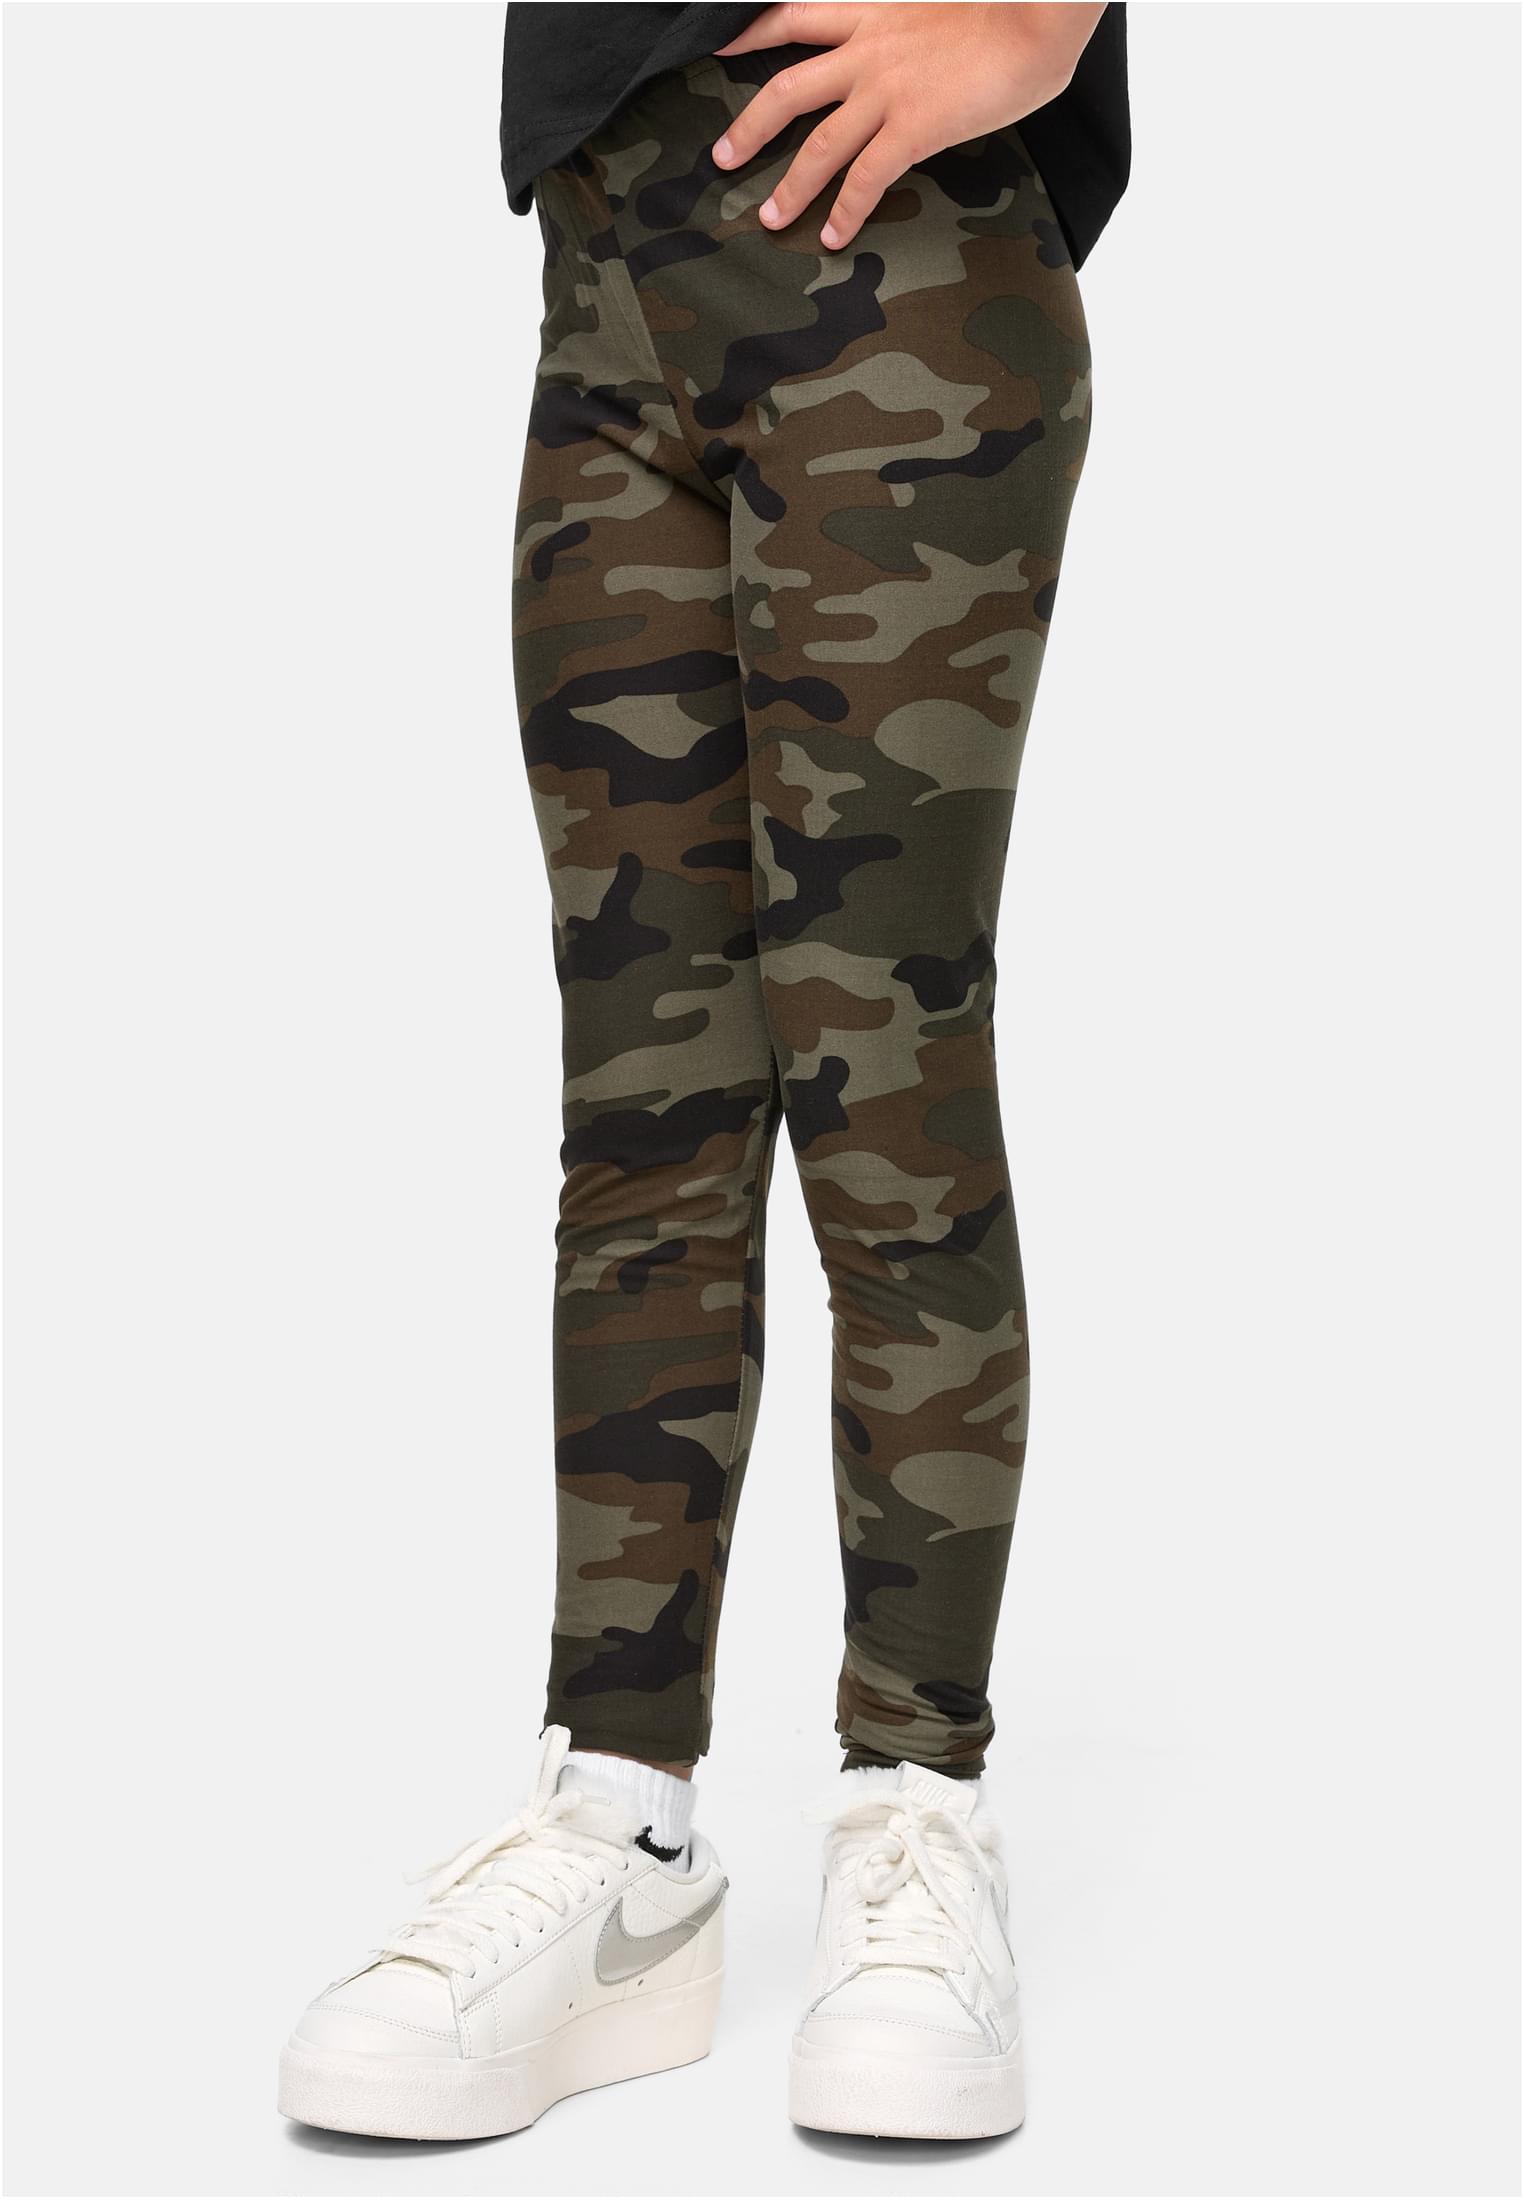 Womens Best Camo Seamless Leggings Reviews 2019 | International Society of  Precision Agriculture